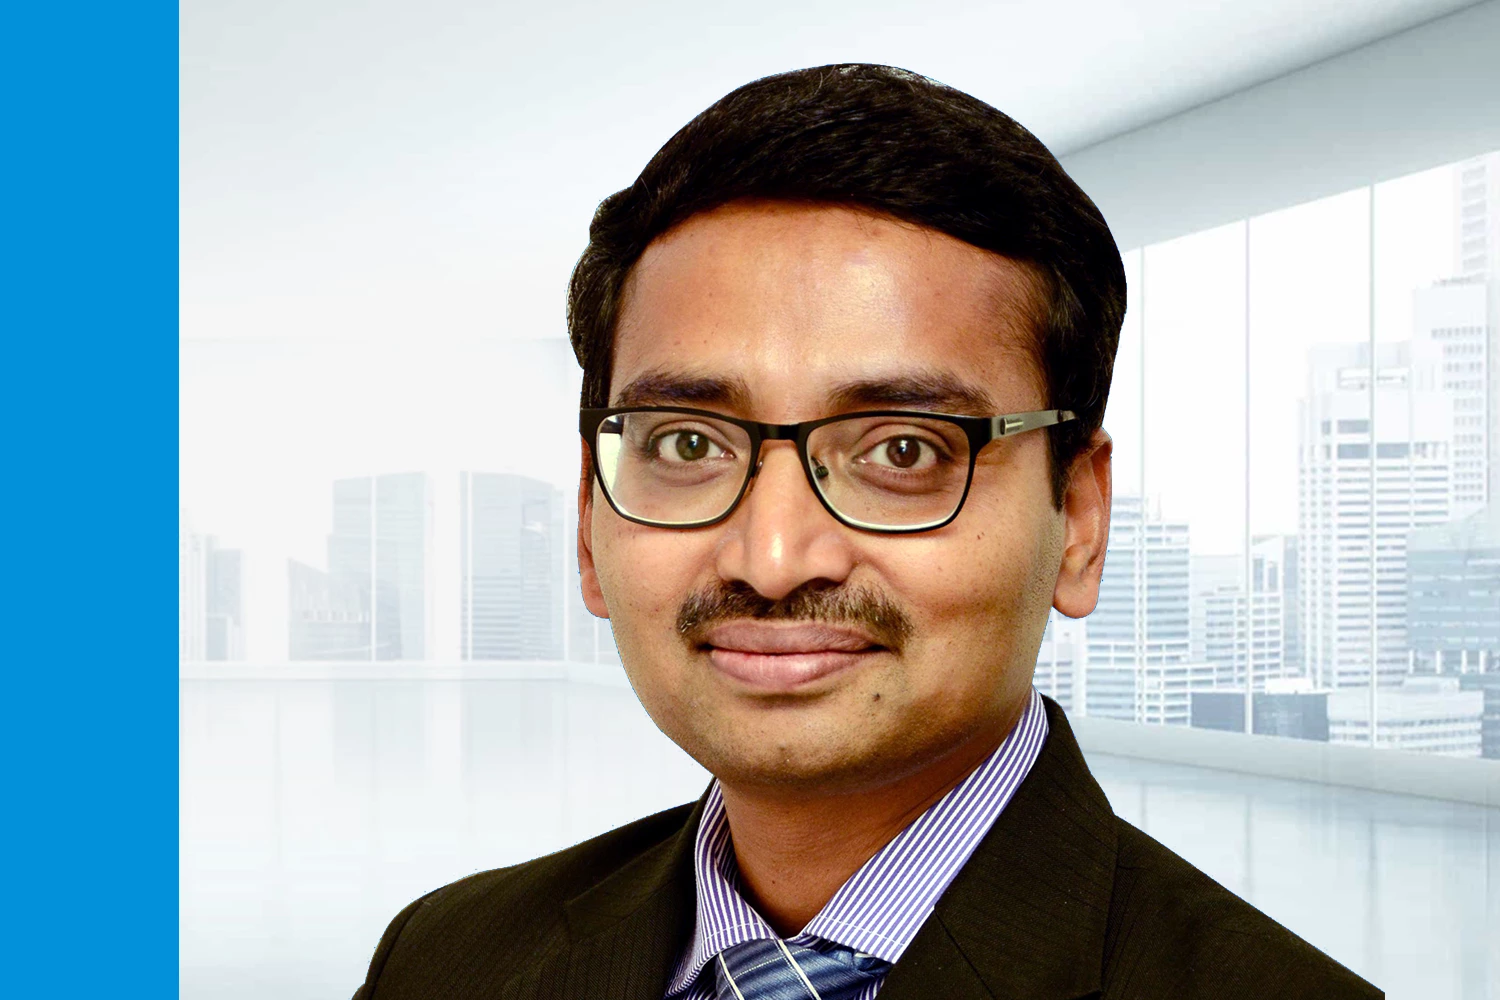 Anish De, <span>Global Sector Lead, Power and Utilities, KPMG in India</span>